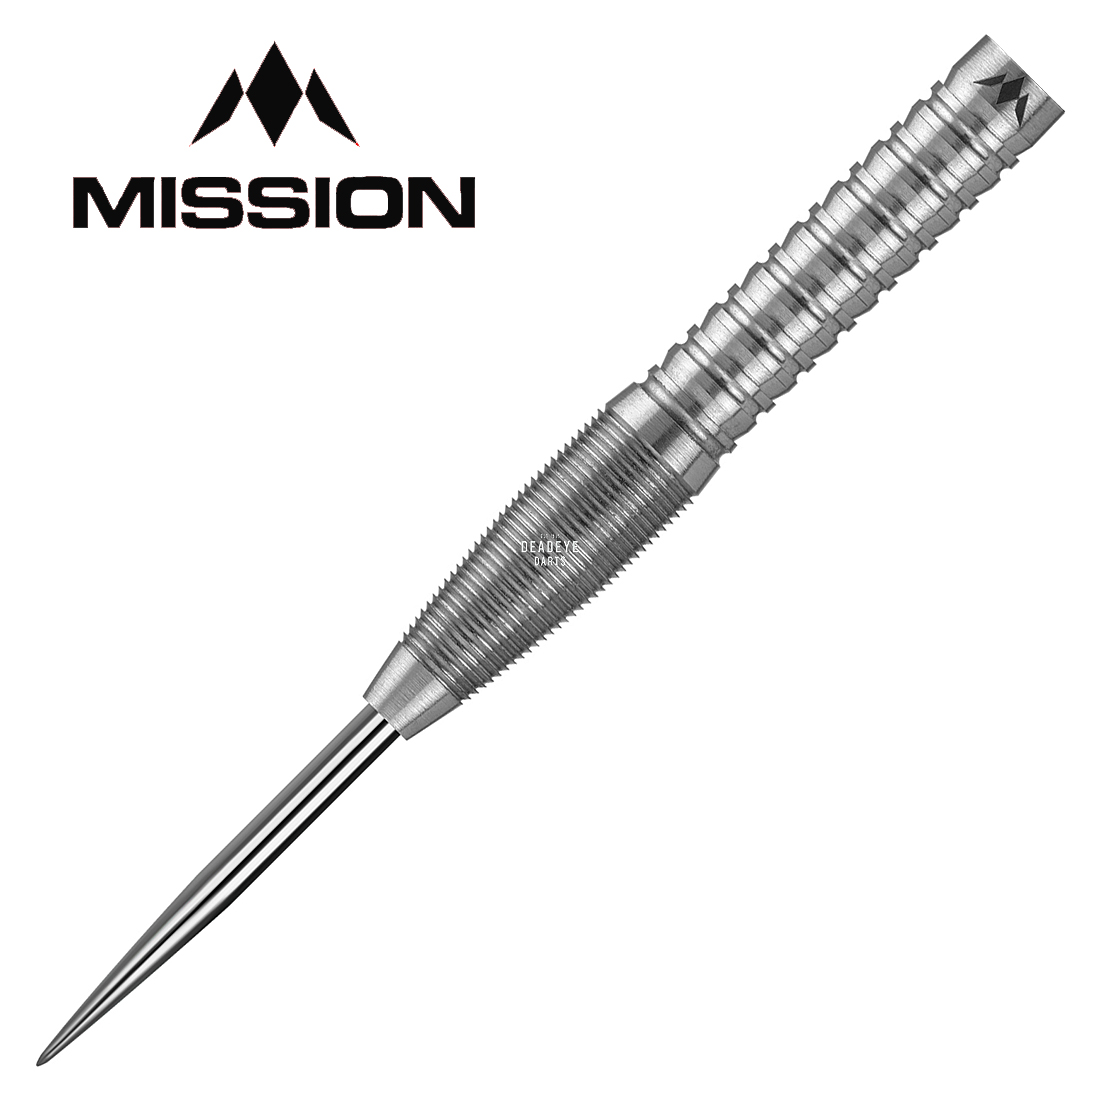 Review of Mission Spirit M6 21g Darts